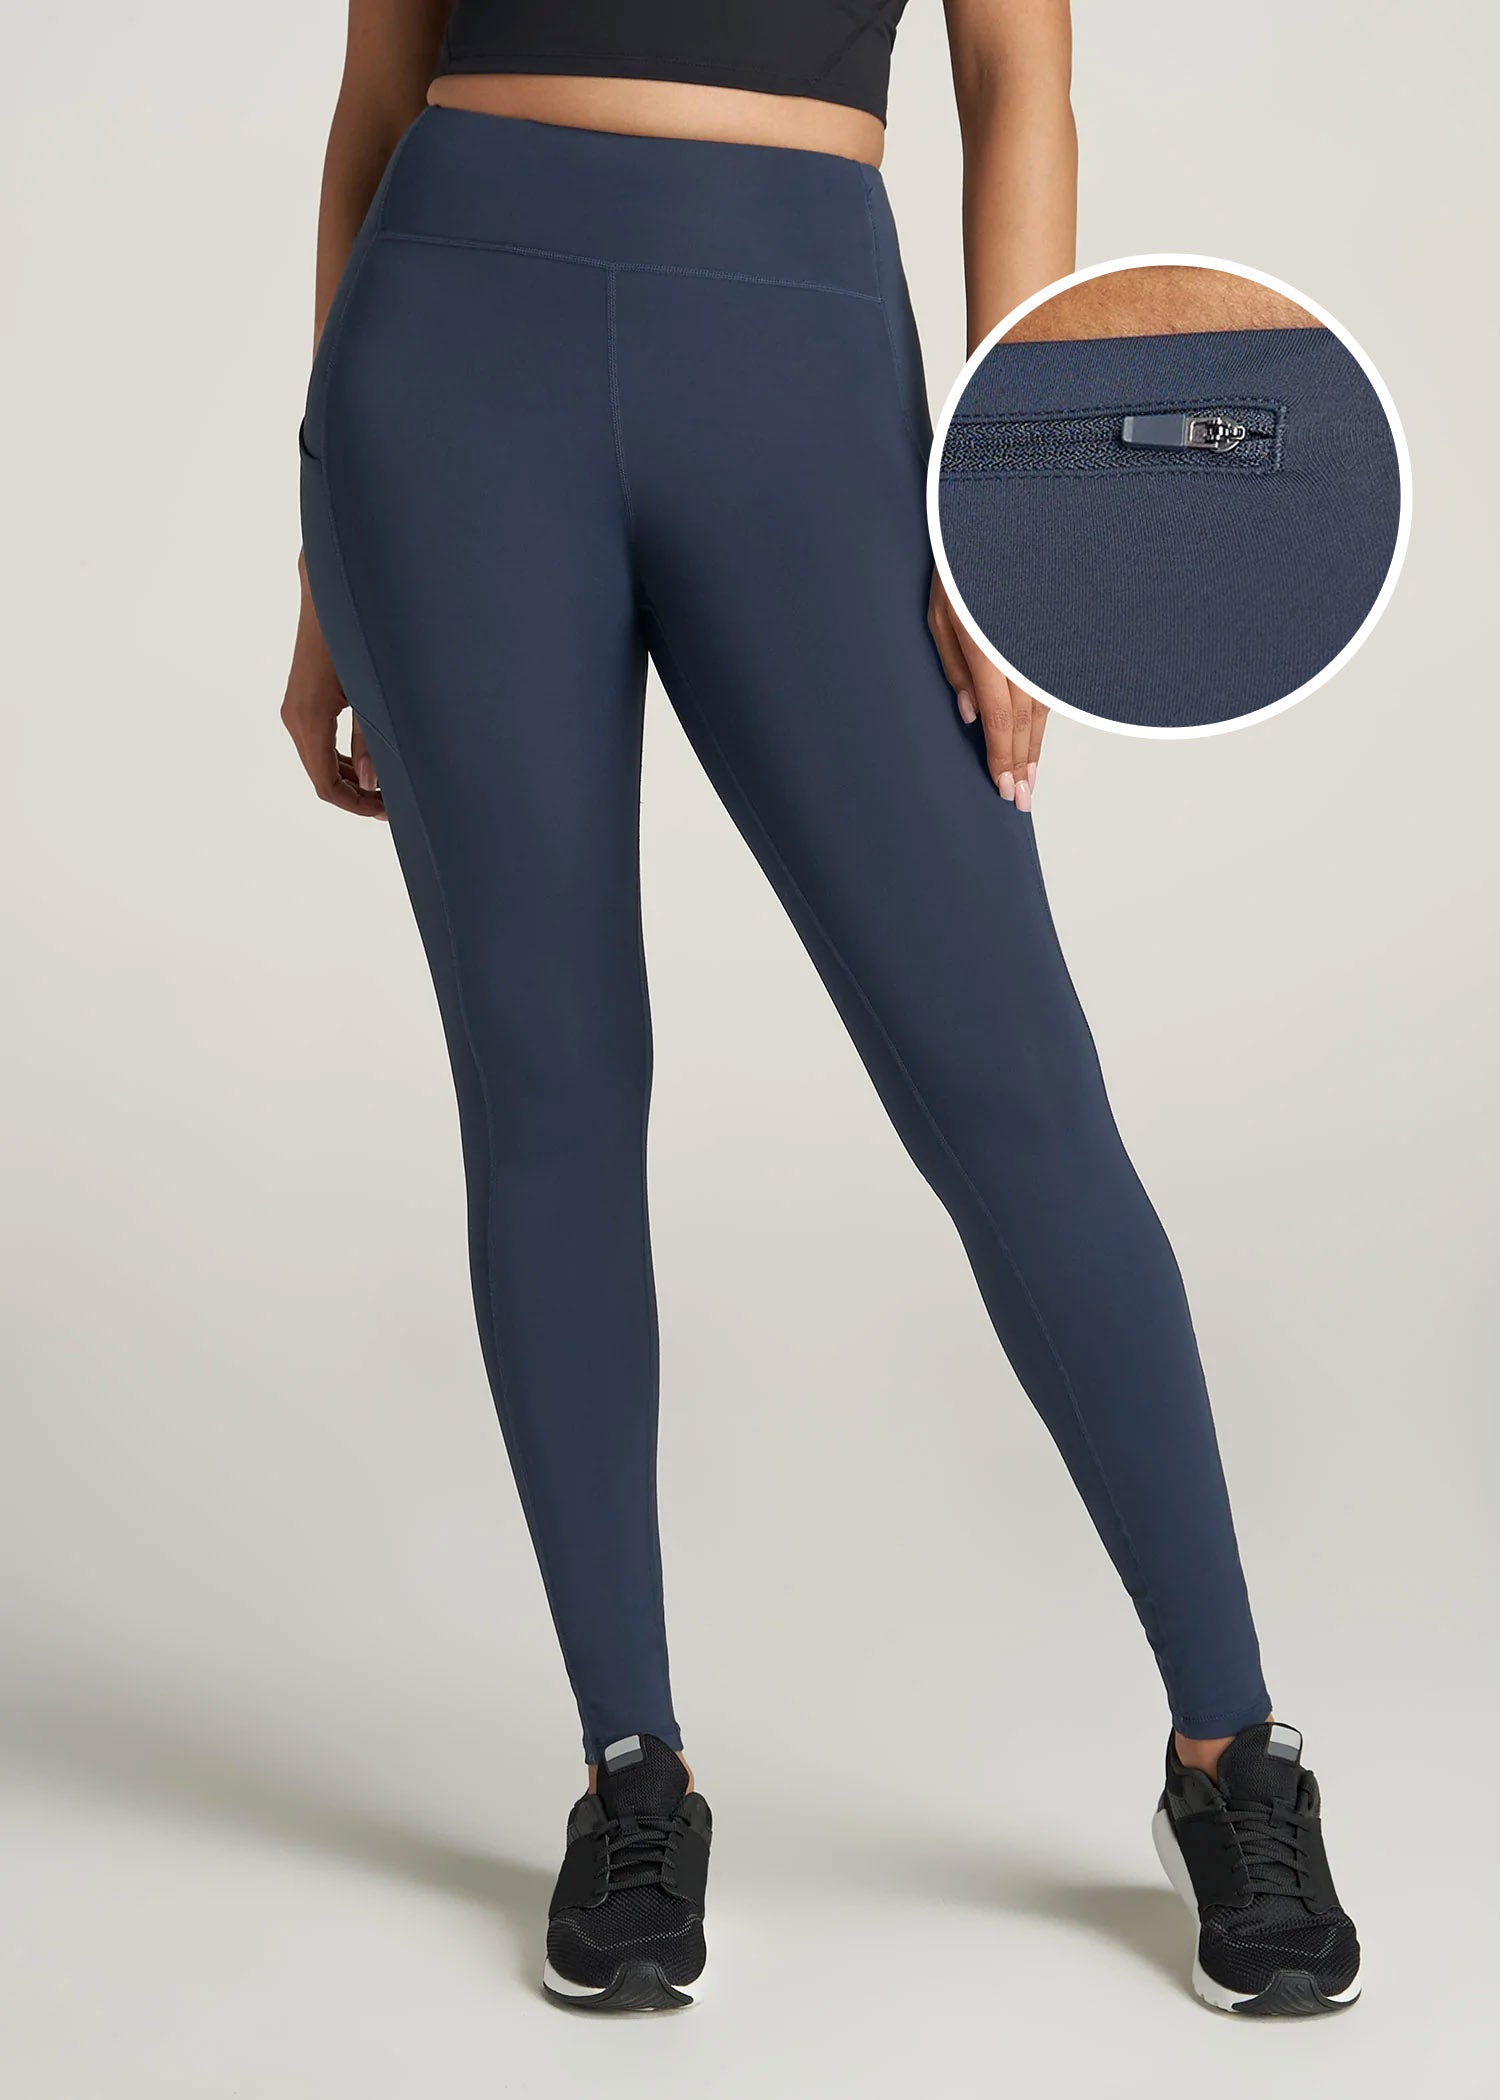 Foreign Trade Double-Sided Yoga Pants Female Buttock Sports